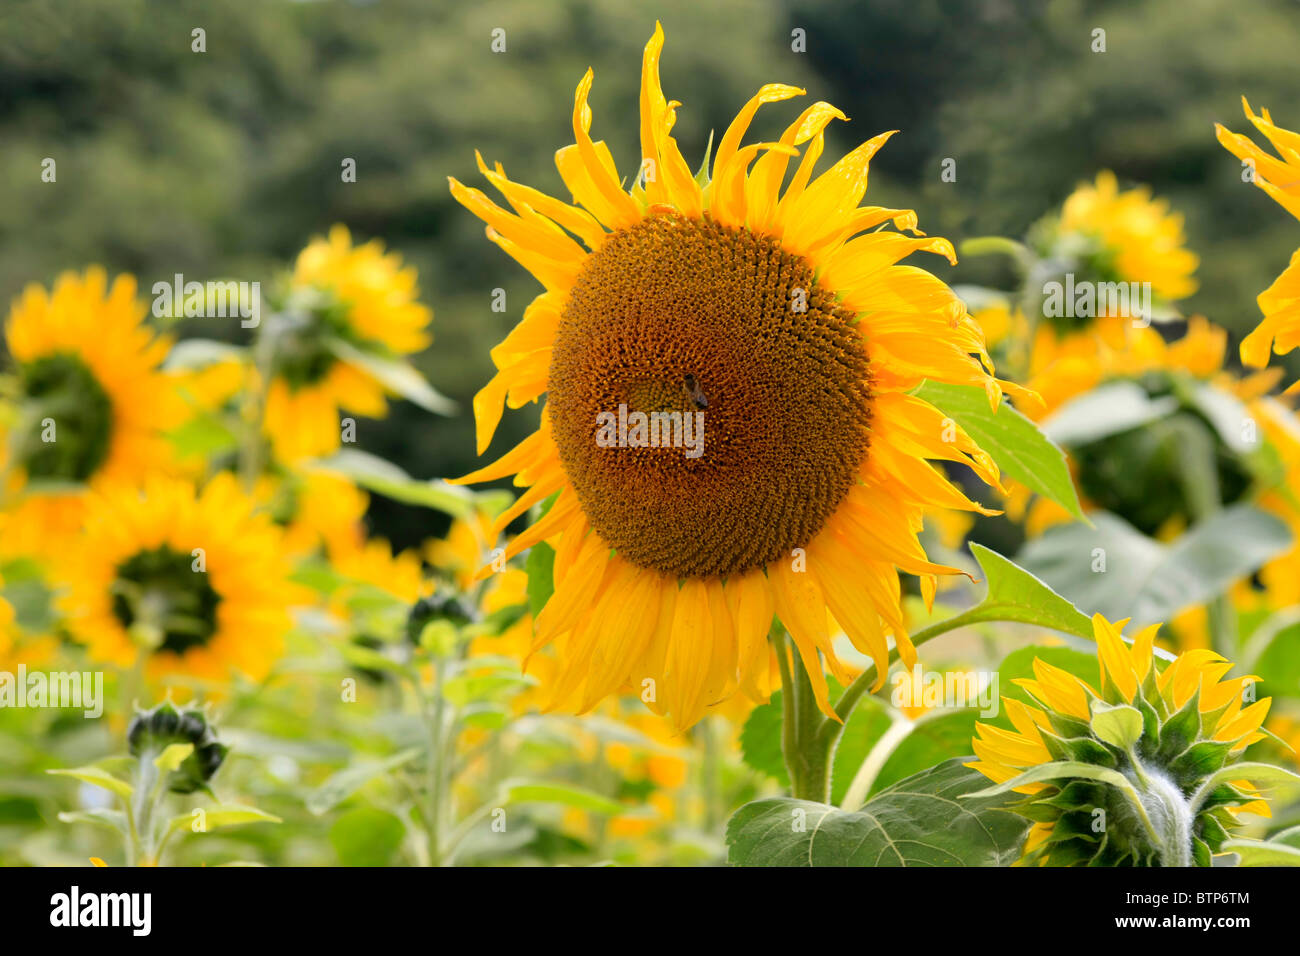 Close up of a single Sunflower in a commercially grown farm field populated with them Stock Photo